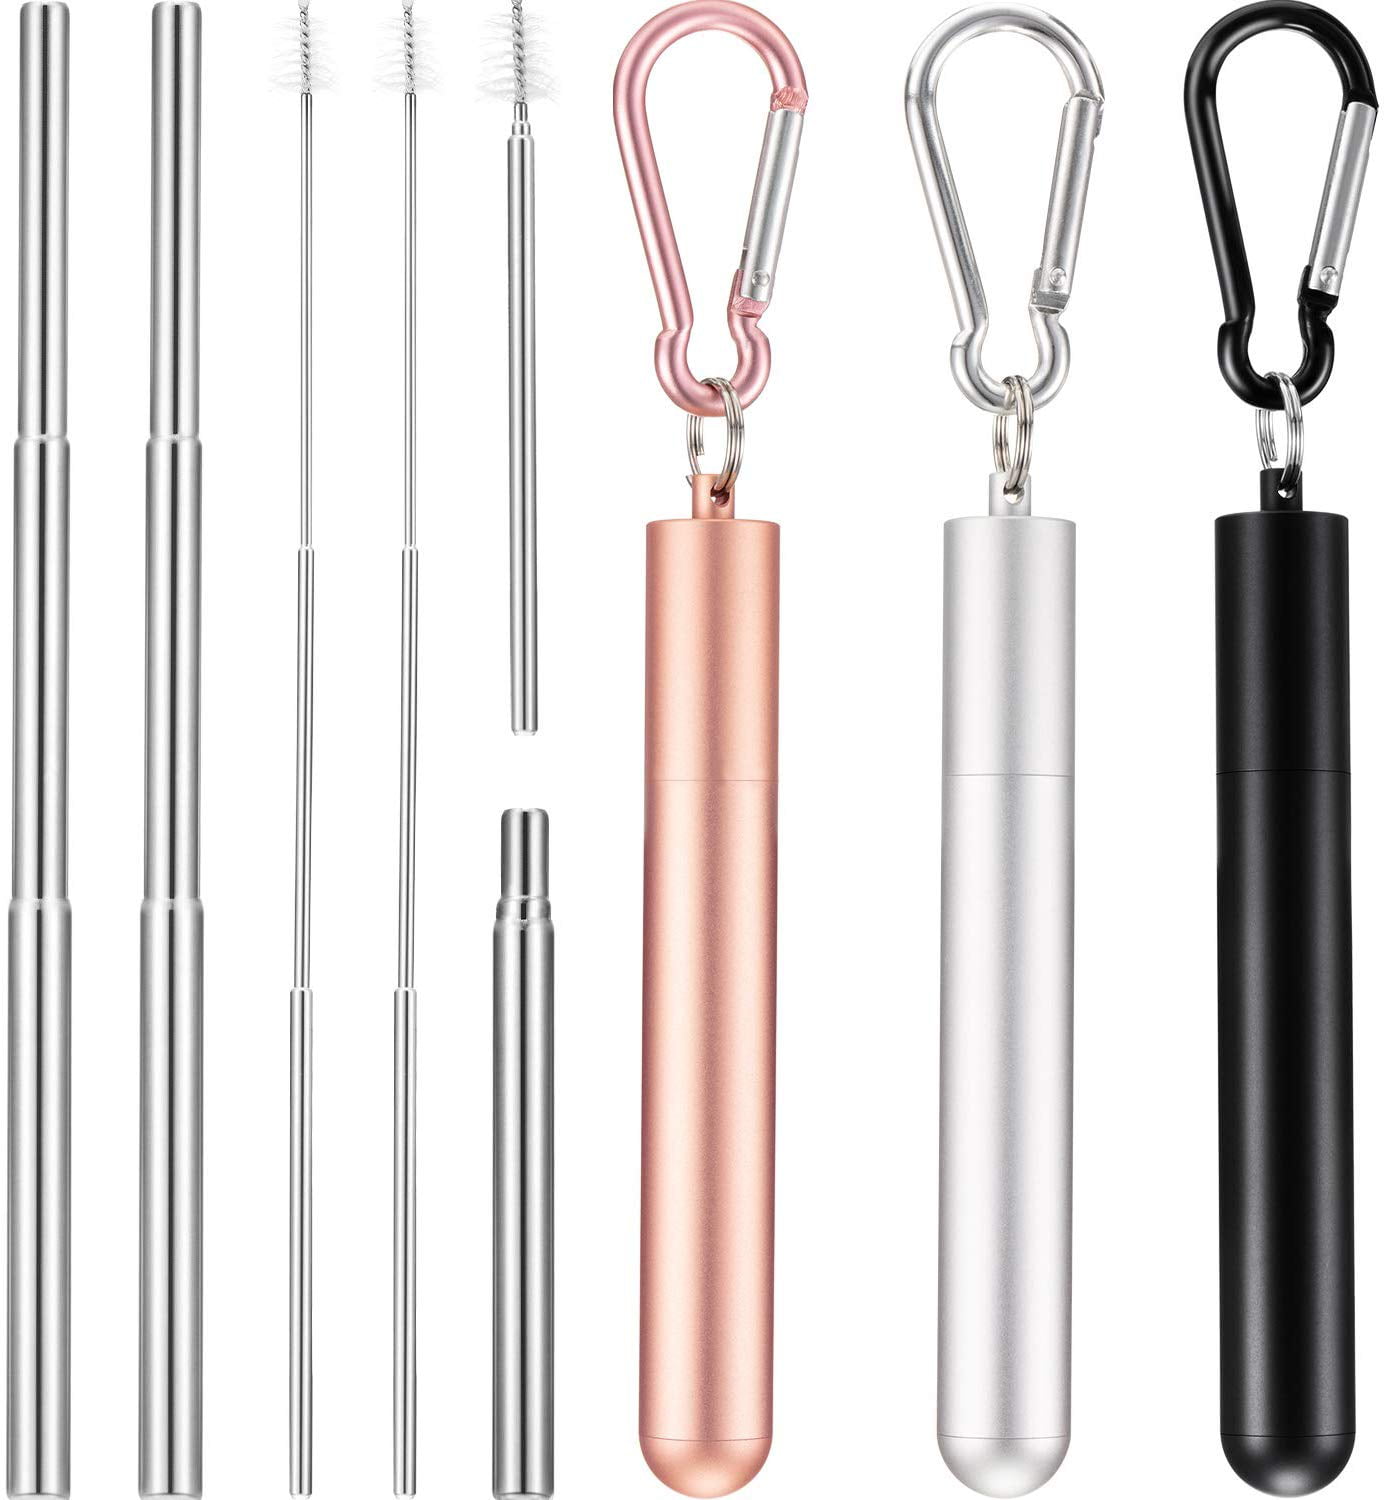 Collapsible stainless steel straws Portable reusable metal straws with cleaning brush Telescopic drinking metal straws with case and keychain 